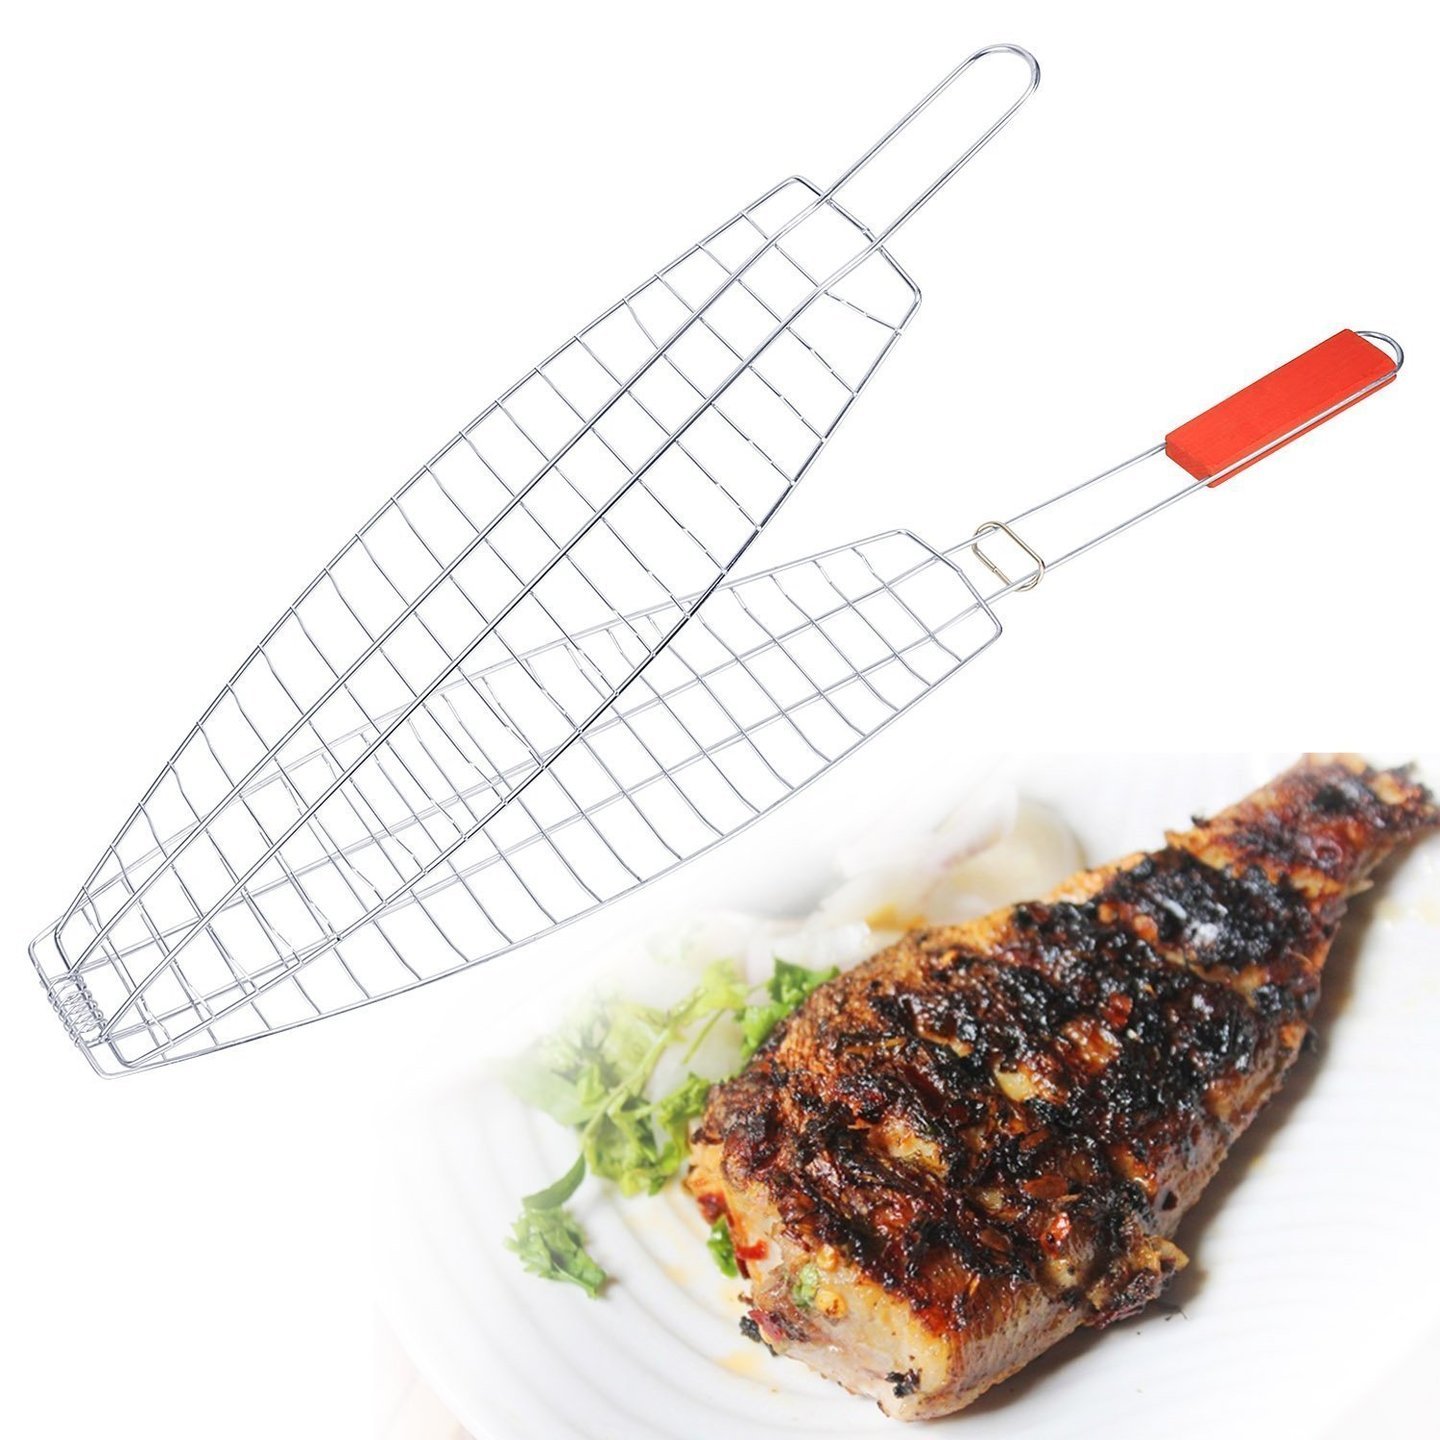 JonPrix Fish Barbecue Grill Net Basket with Wooden Handle